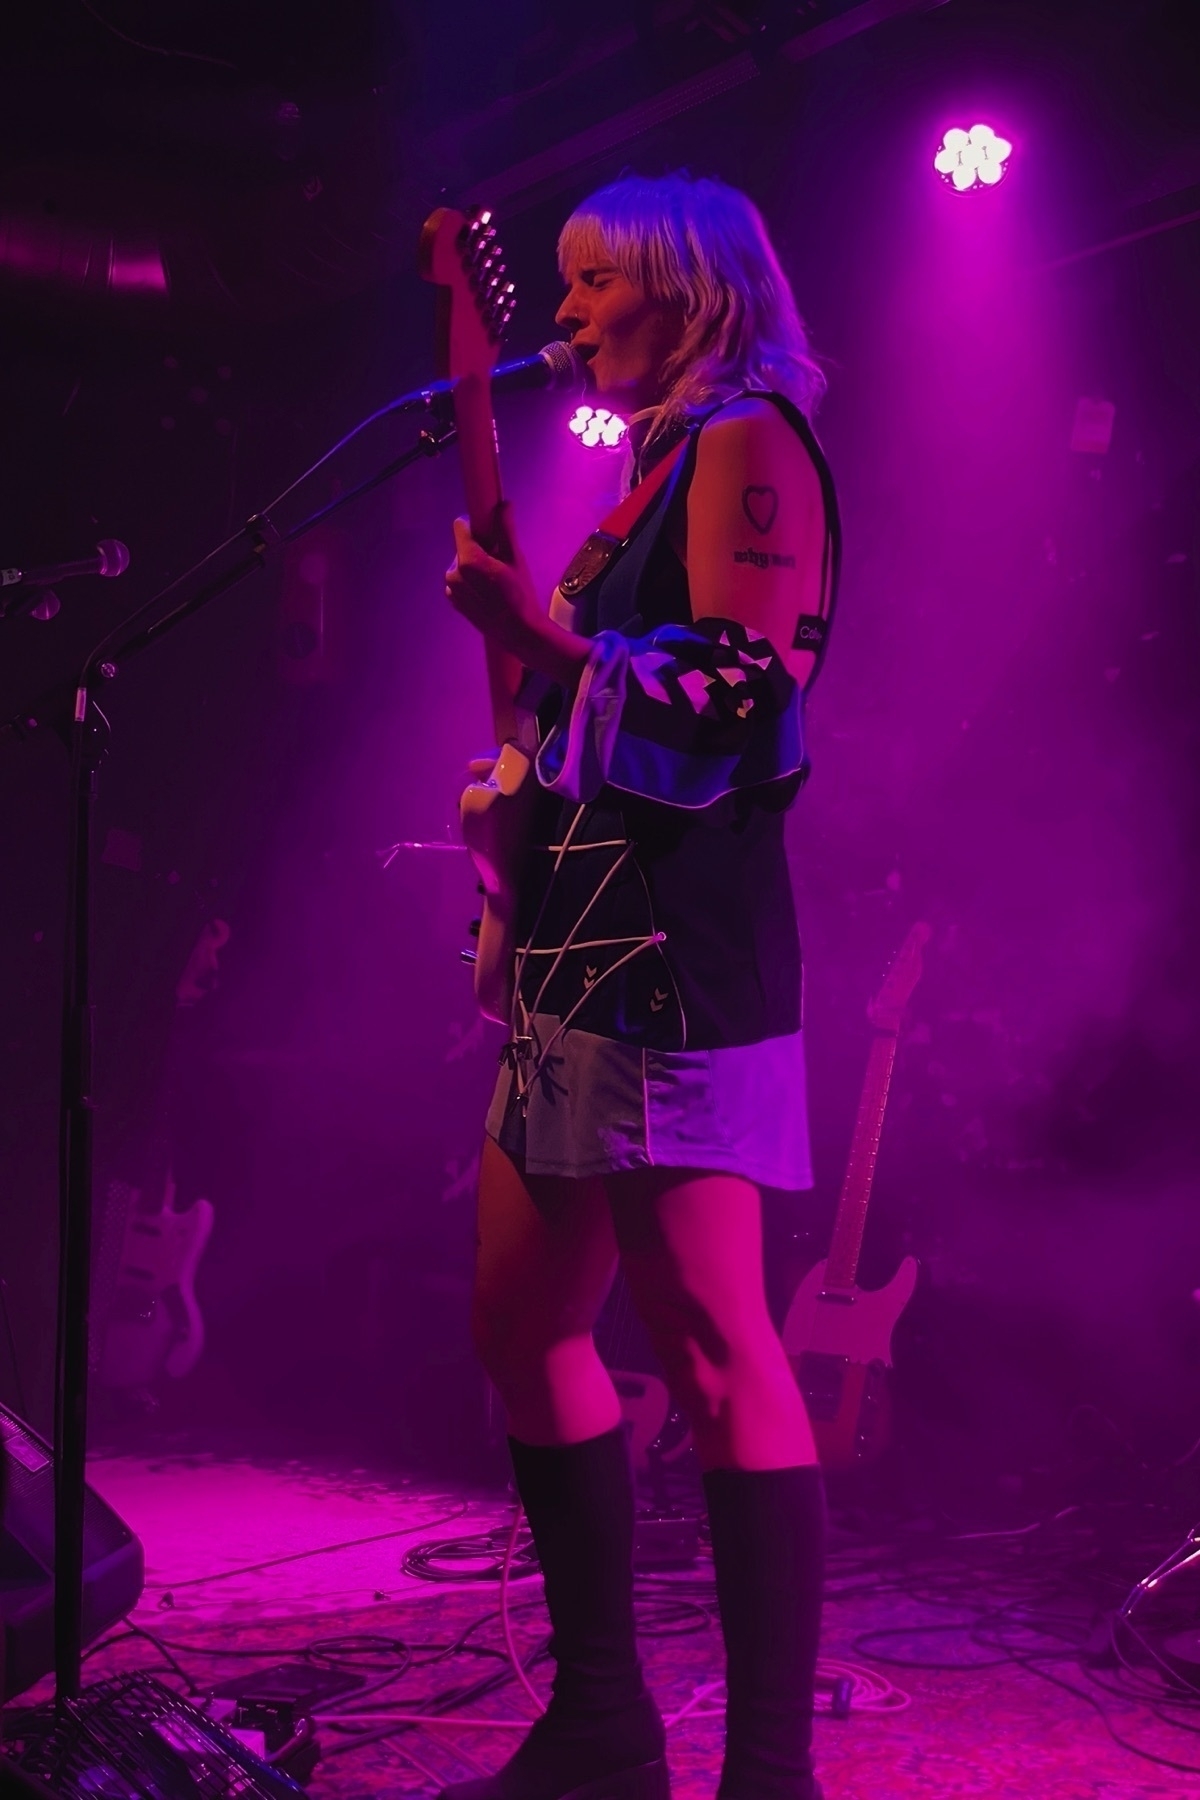 Woman playing guitar and singing into a microphone while standing on stage, the lighting is violet.